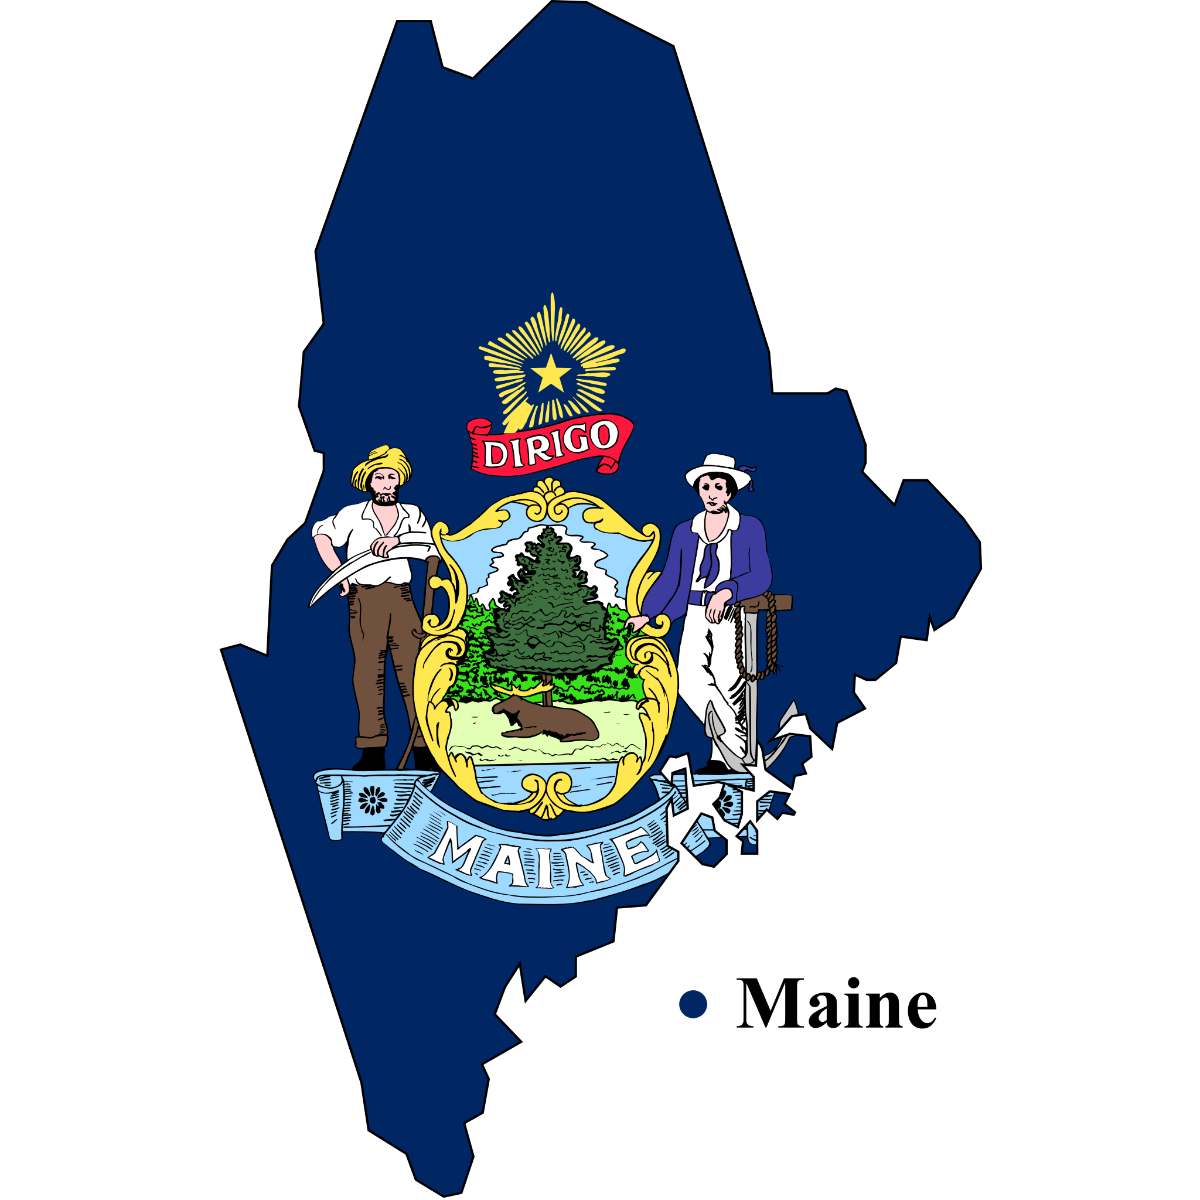 Maine State map cutout with Maine flag superimposed